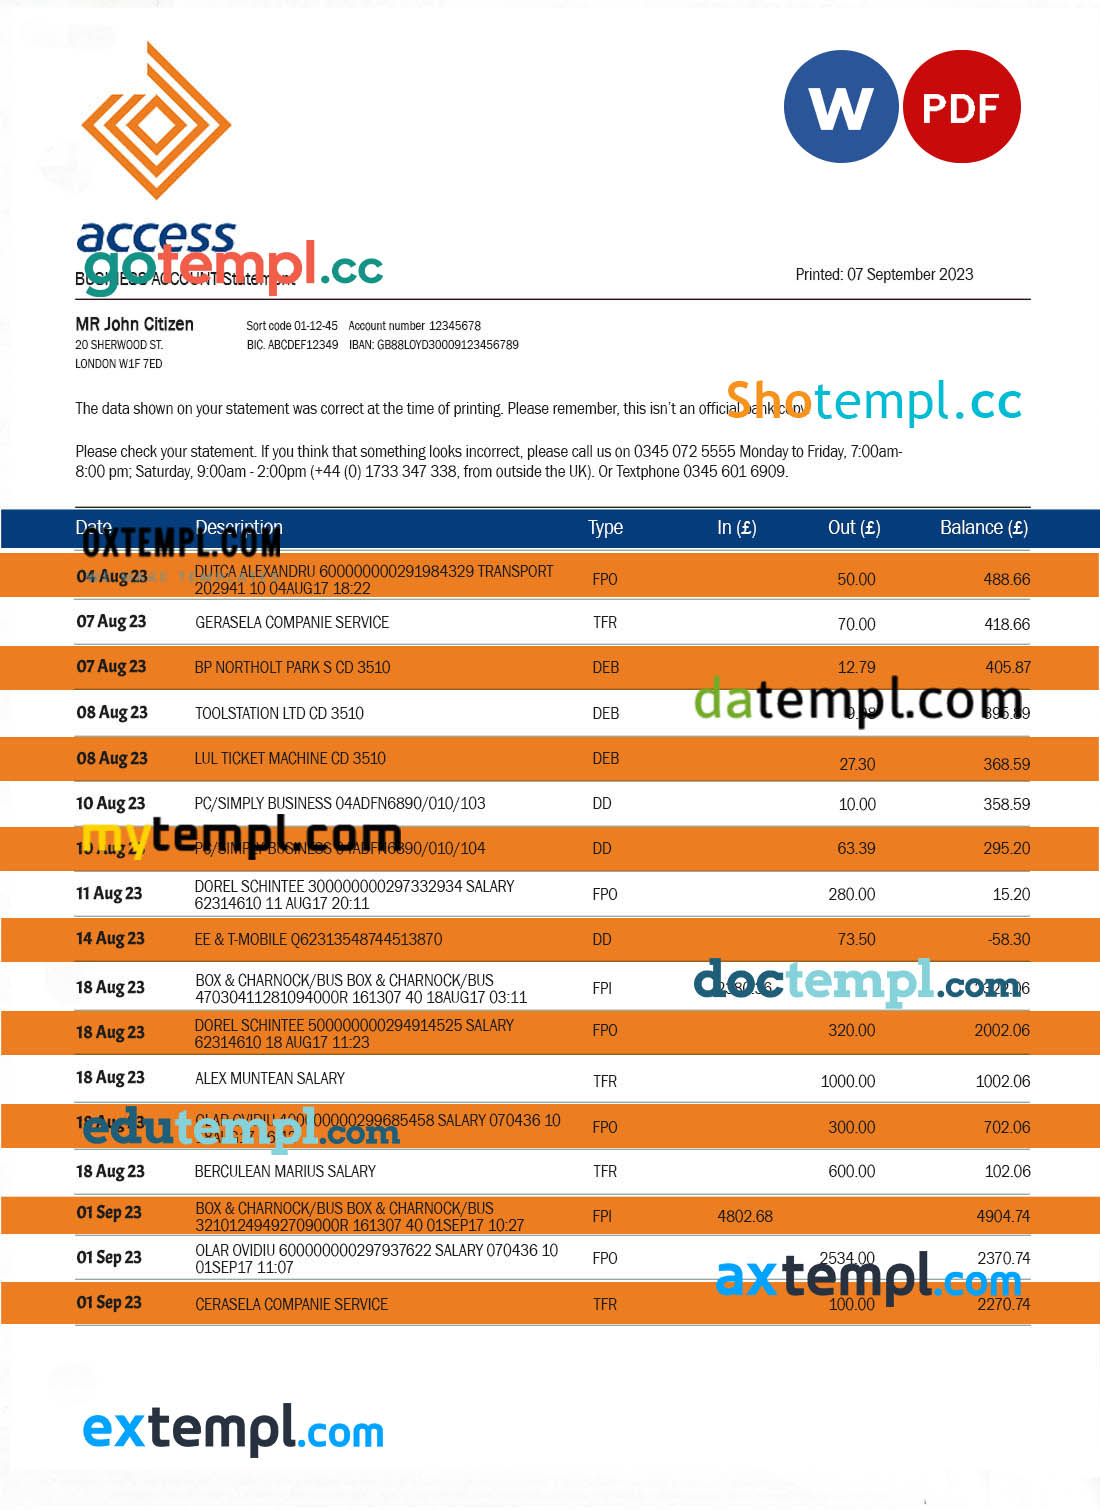 Access Bank company checking account statement Word and PDF template